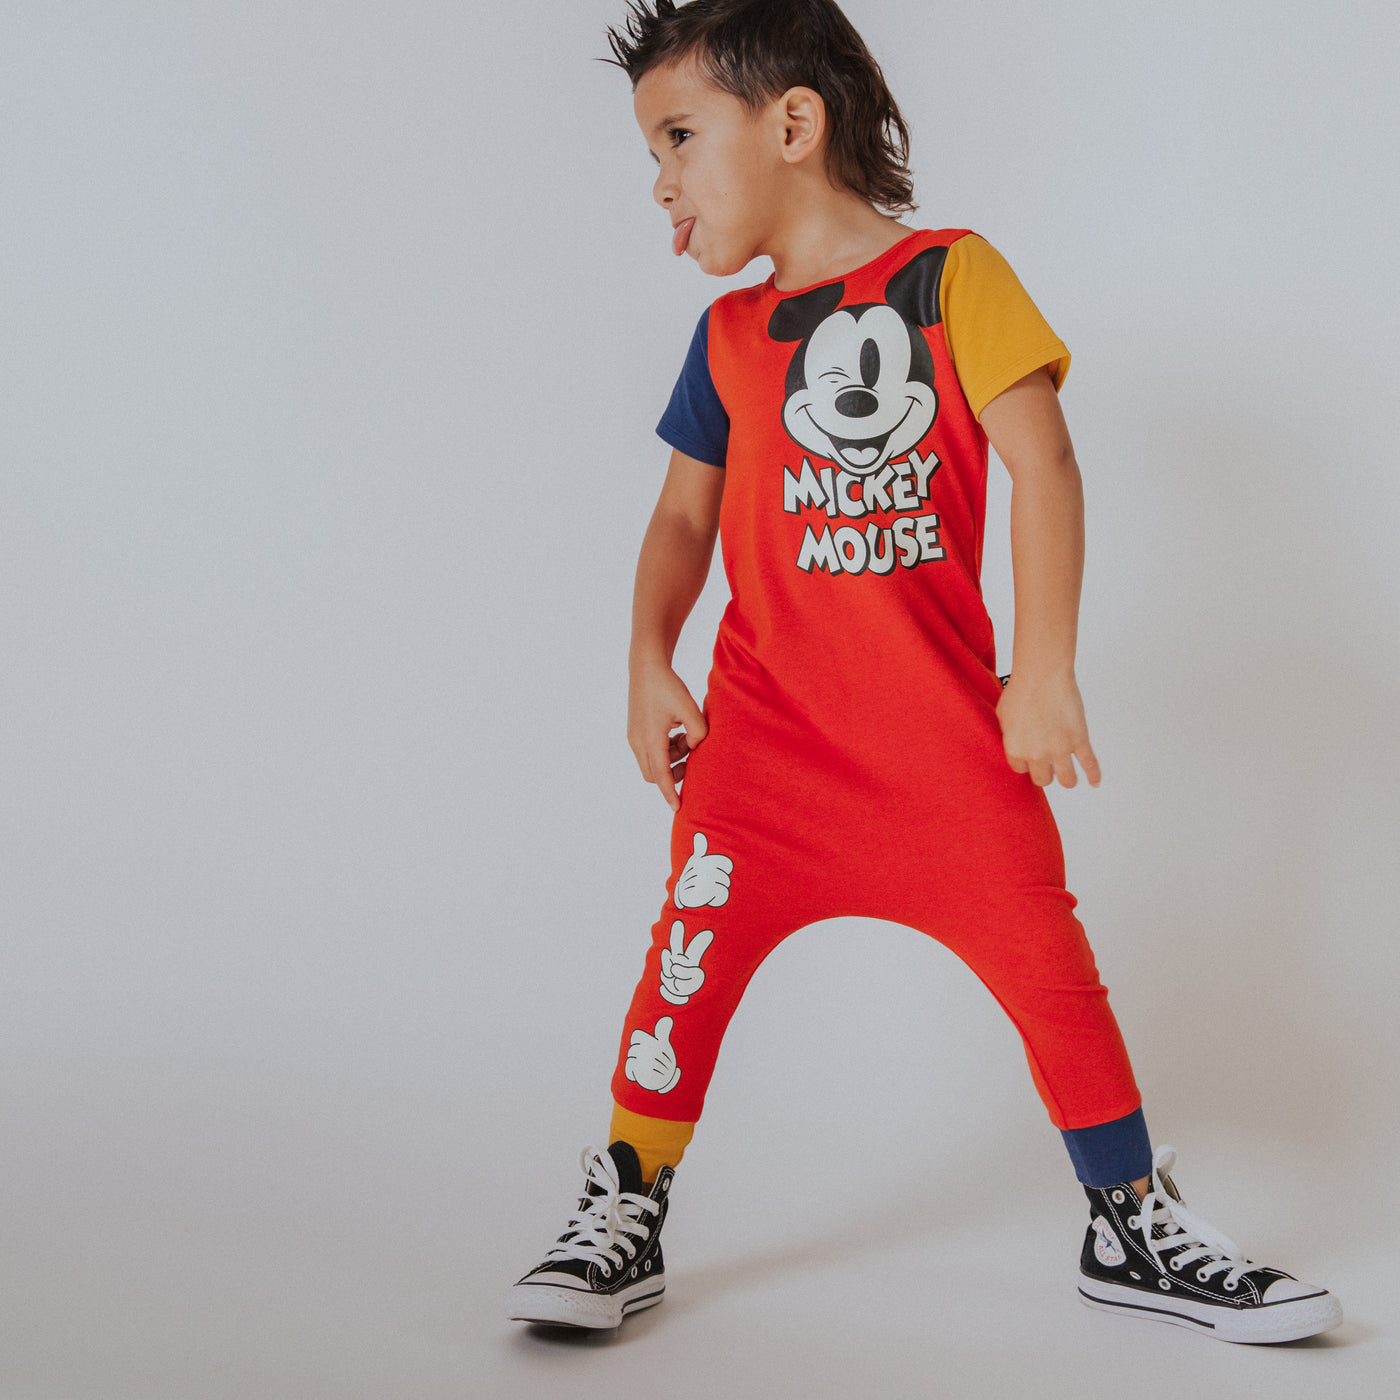 Short Sleeve Rag Romper - 'Mickey Mouse' - Disney Collection from Rags